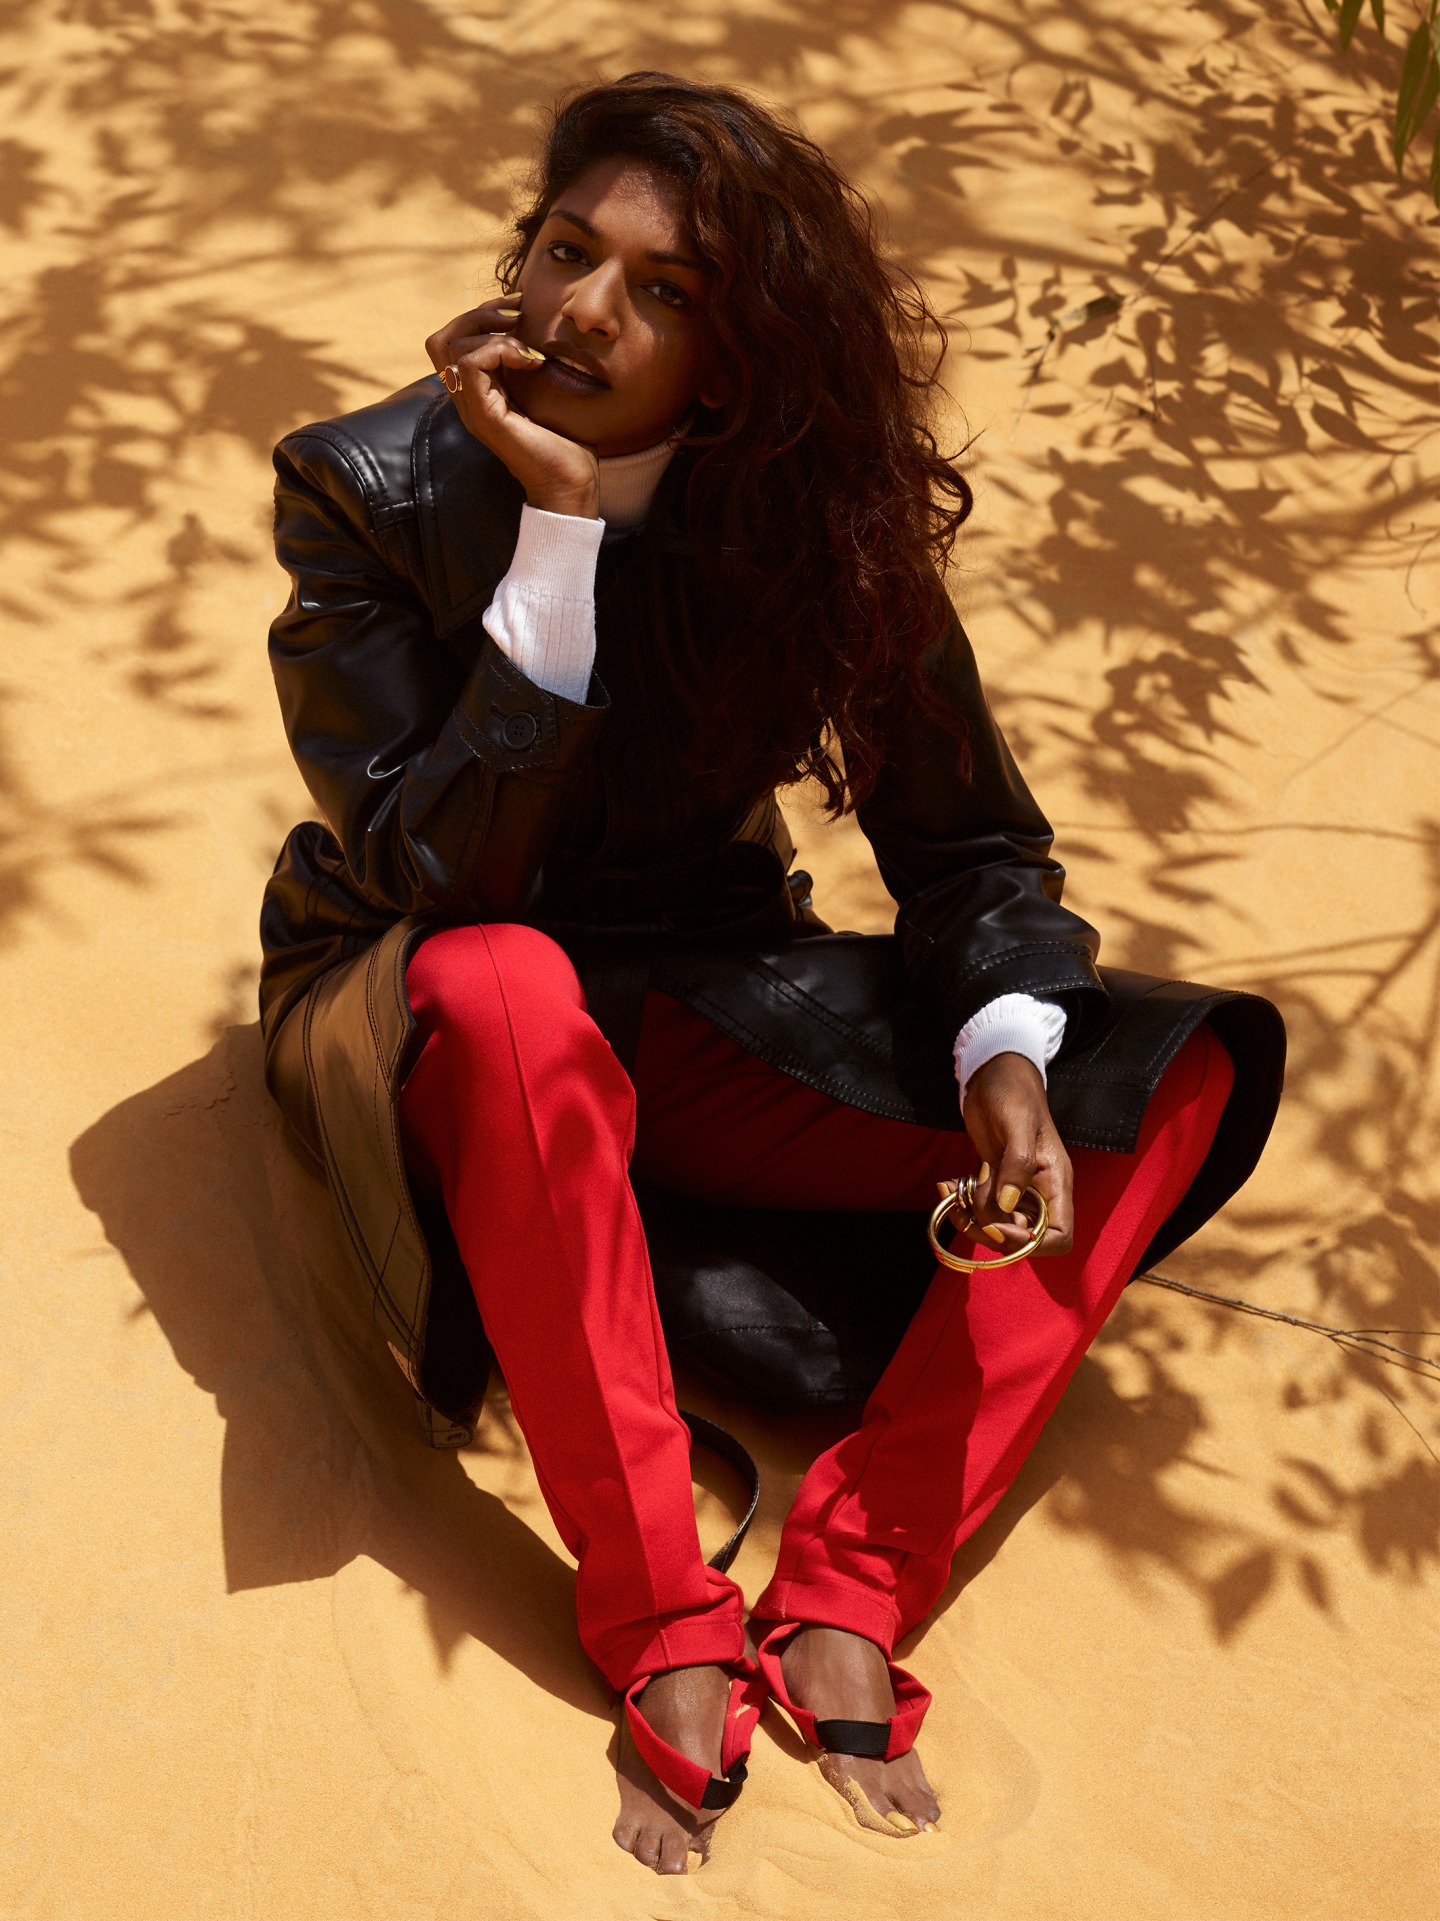 M.I.A. Says This Is Her Last Album Ever. But It Seems Like She Still Has A Lot To Say.